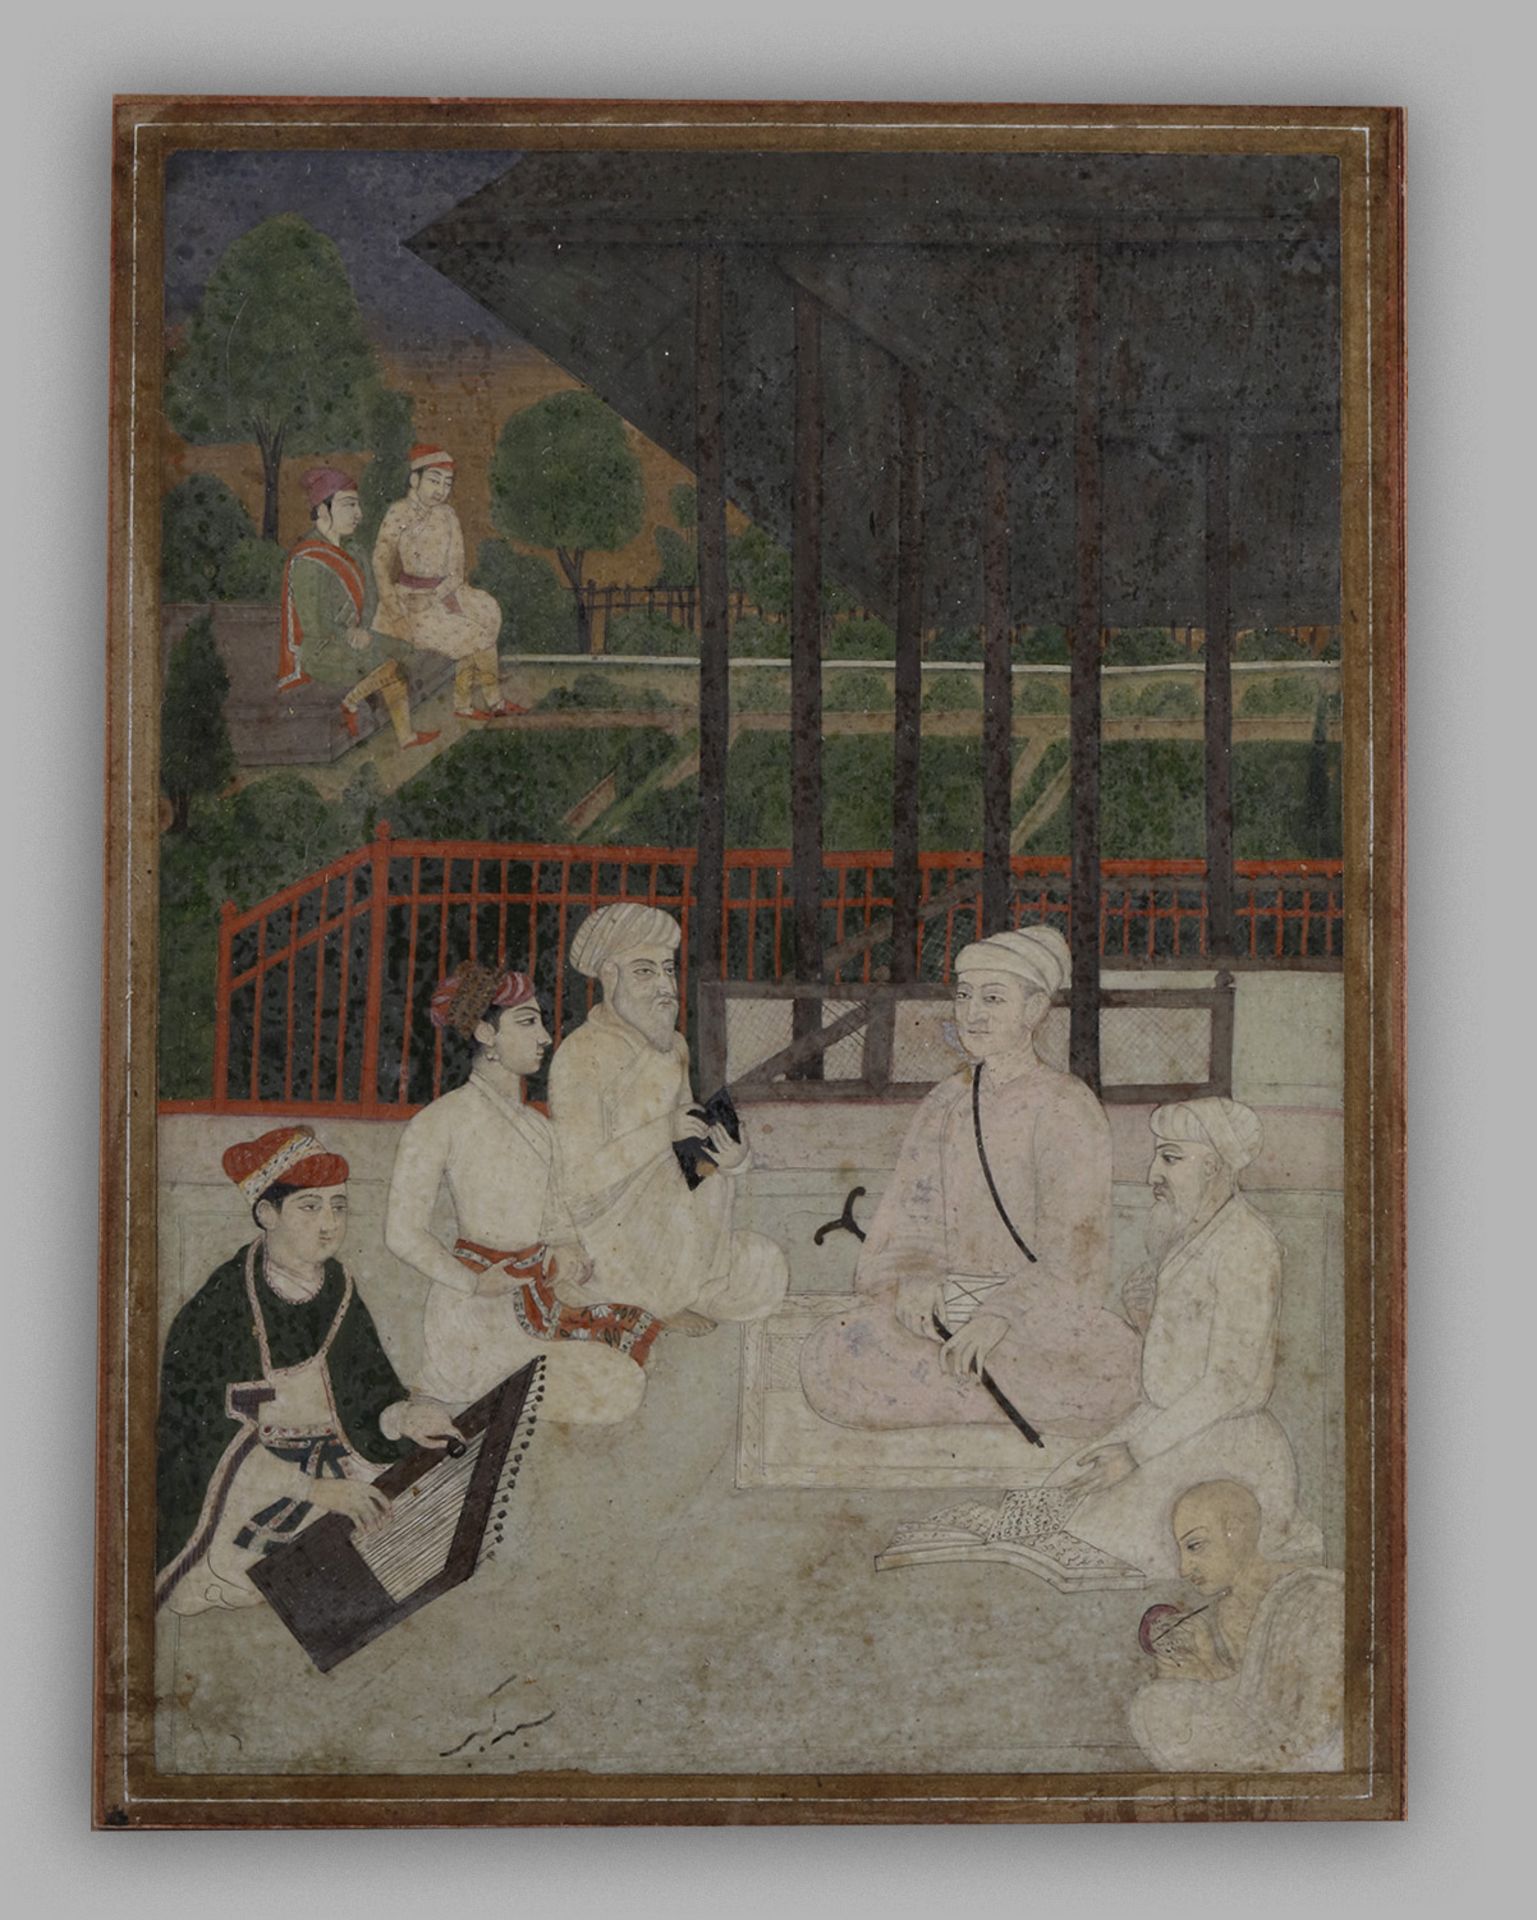 A Moghul painting depicting various figures